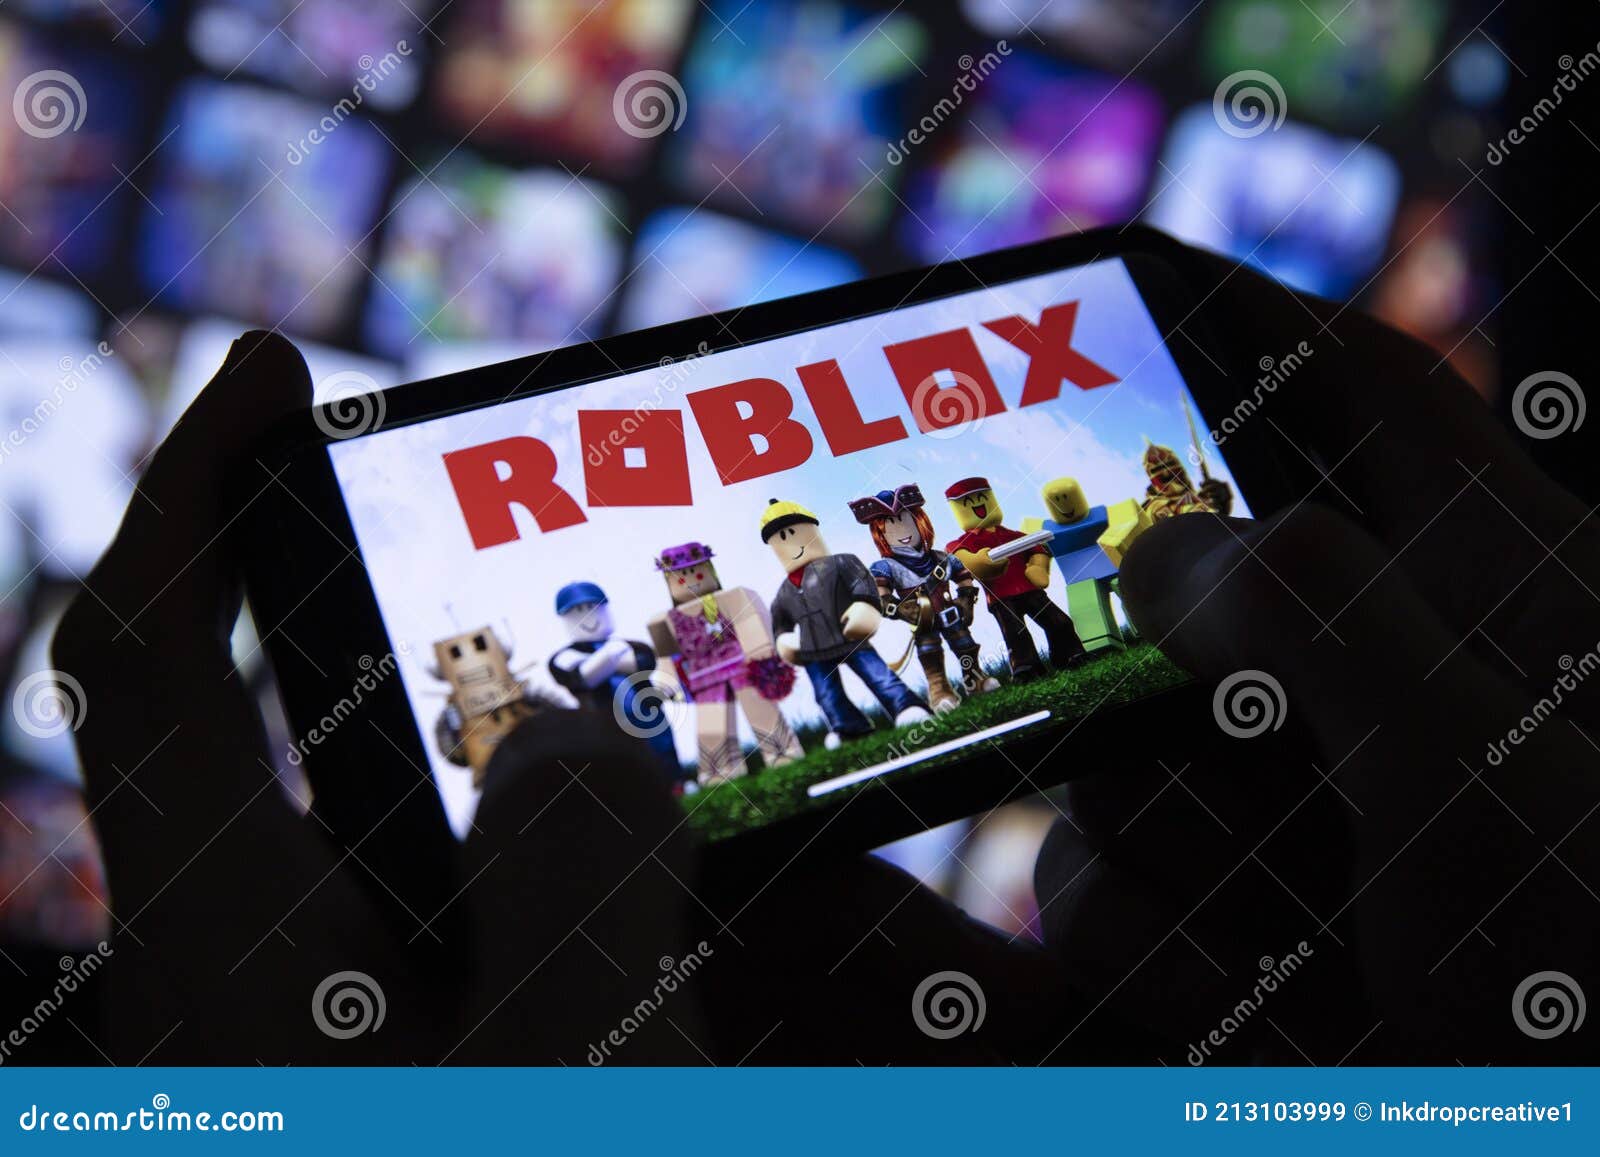 Roblox Photos Free Royalty Free Stock Photos From Dreamstime - russian cream roblox id